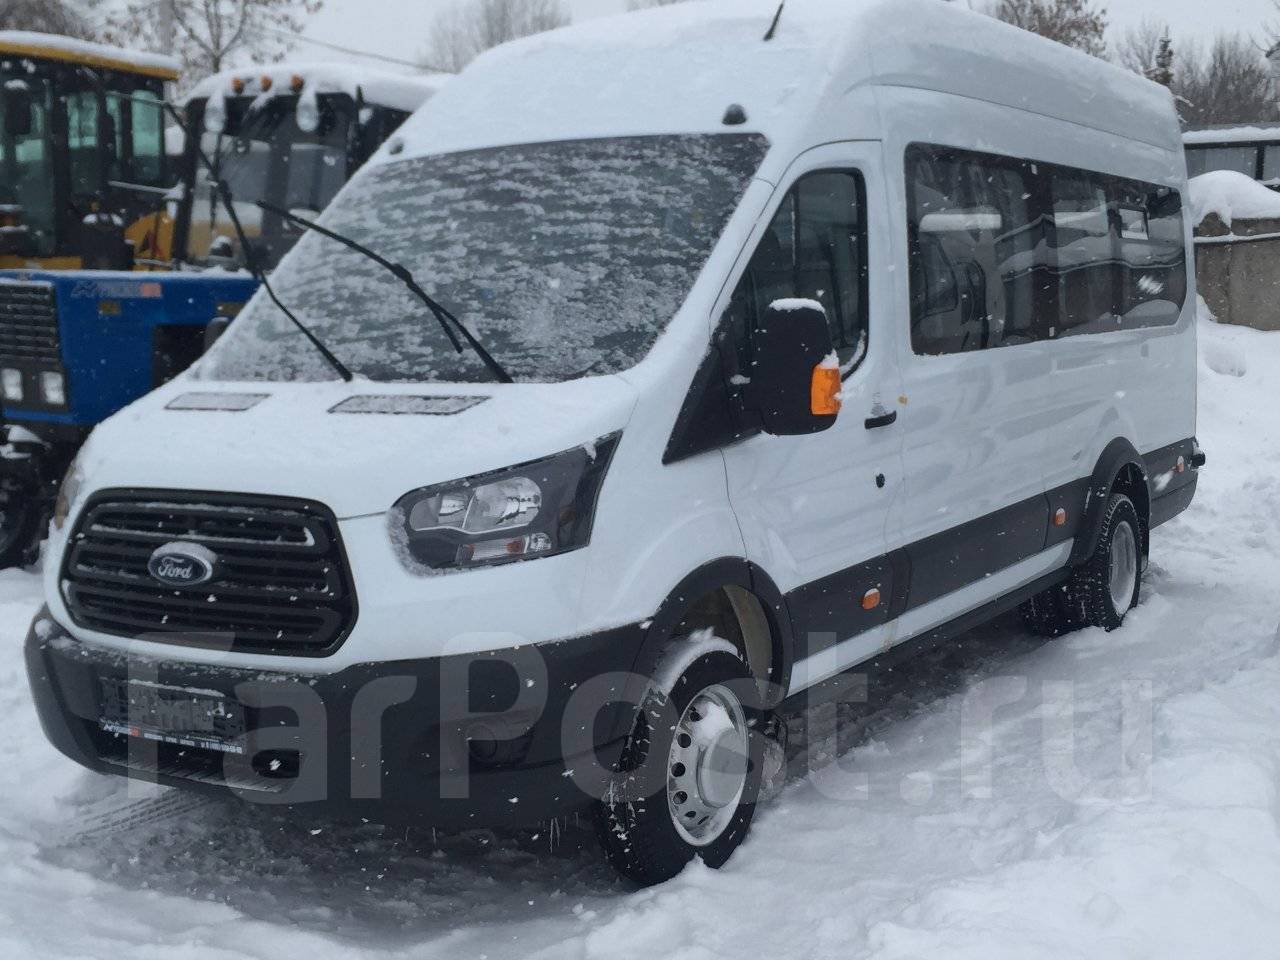 Форд транзит 19. Ford Transit Shuttle. Ford Transit Shuttle Bus. Форд Транзит Шатл бус. Форд Транзит 19+3+1.